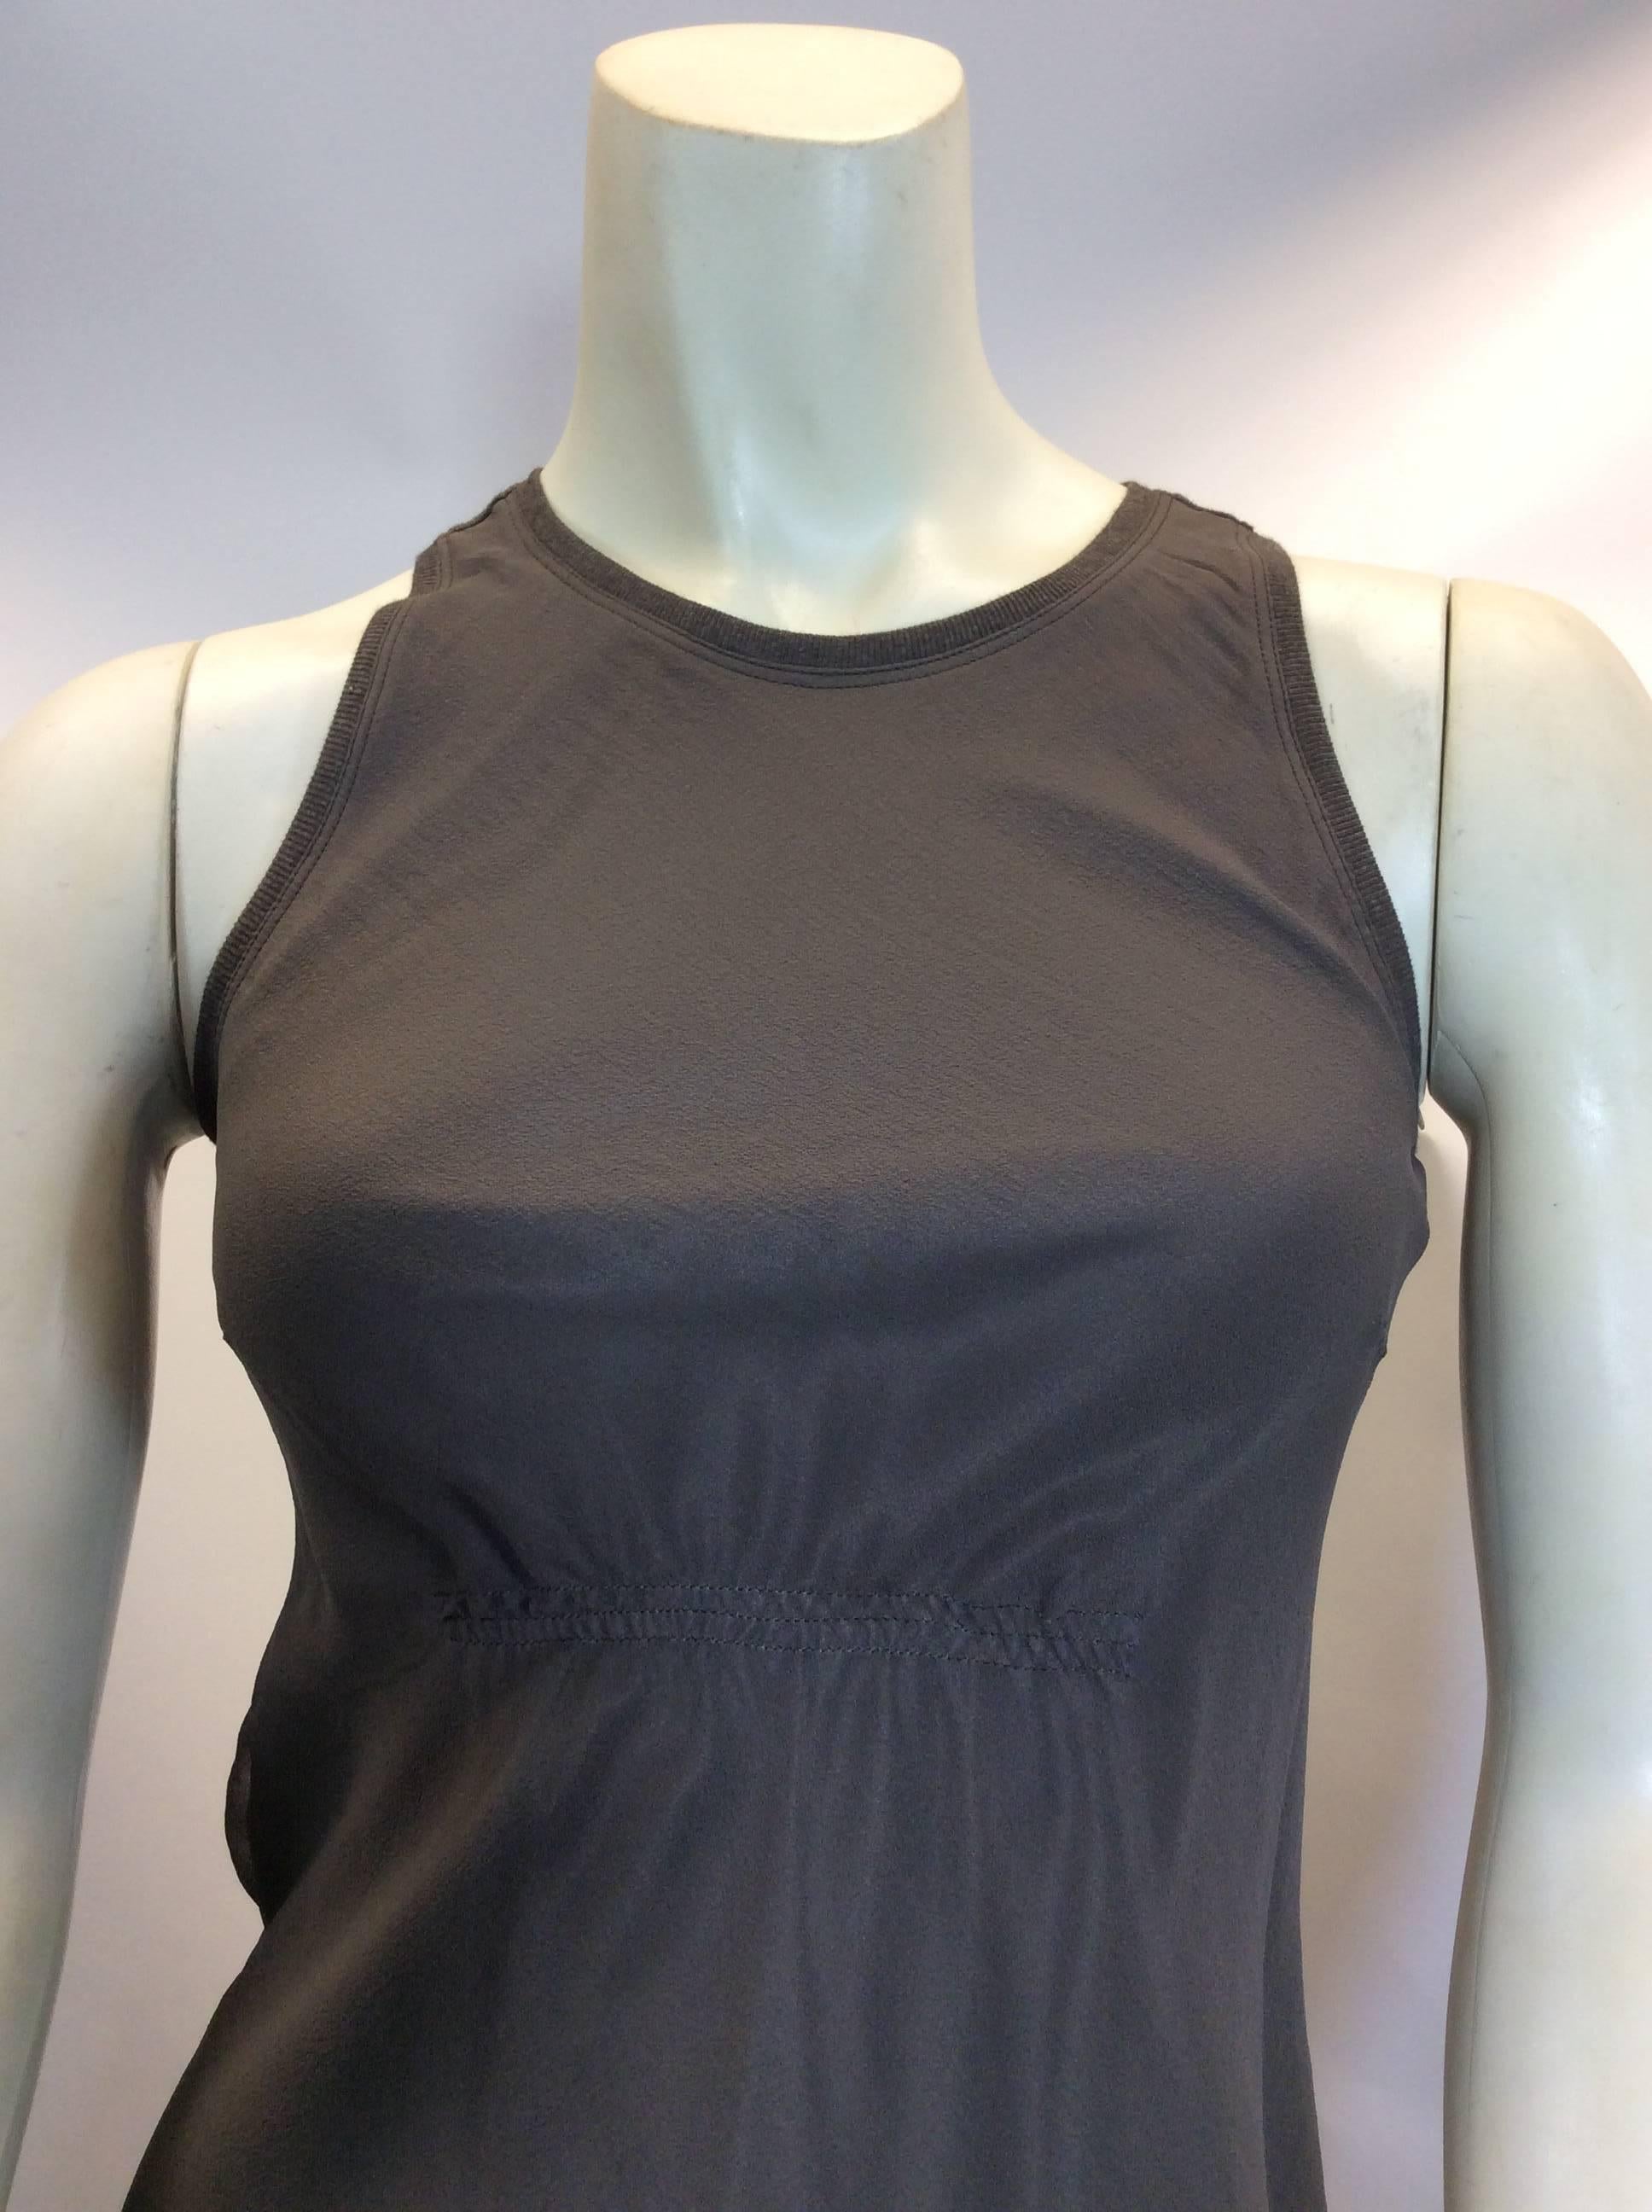 Bruno Cucinelli NWT Silk Top
NWT price: $505
Our price: $399
Size XS
Made in Italy